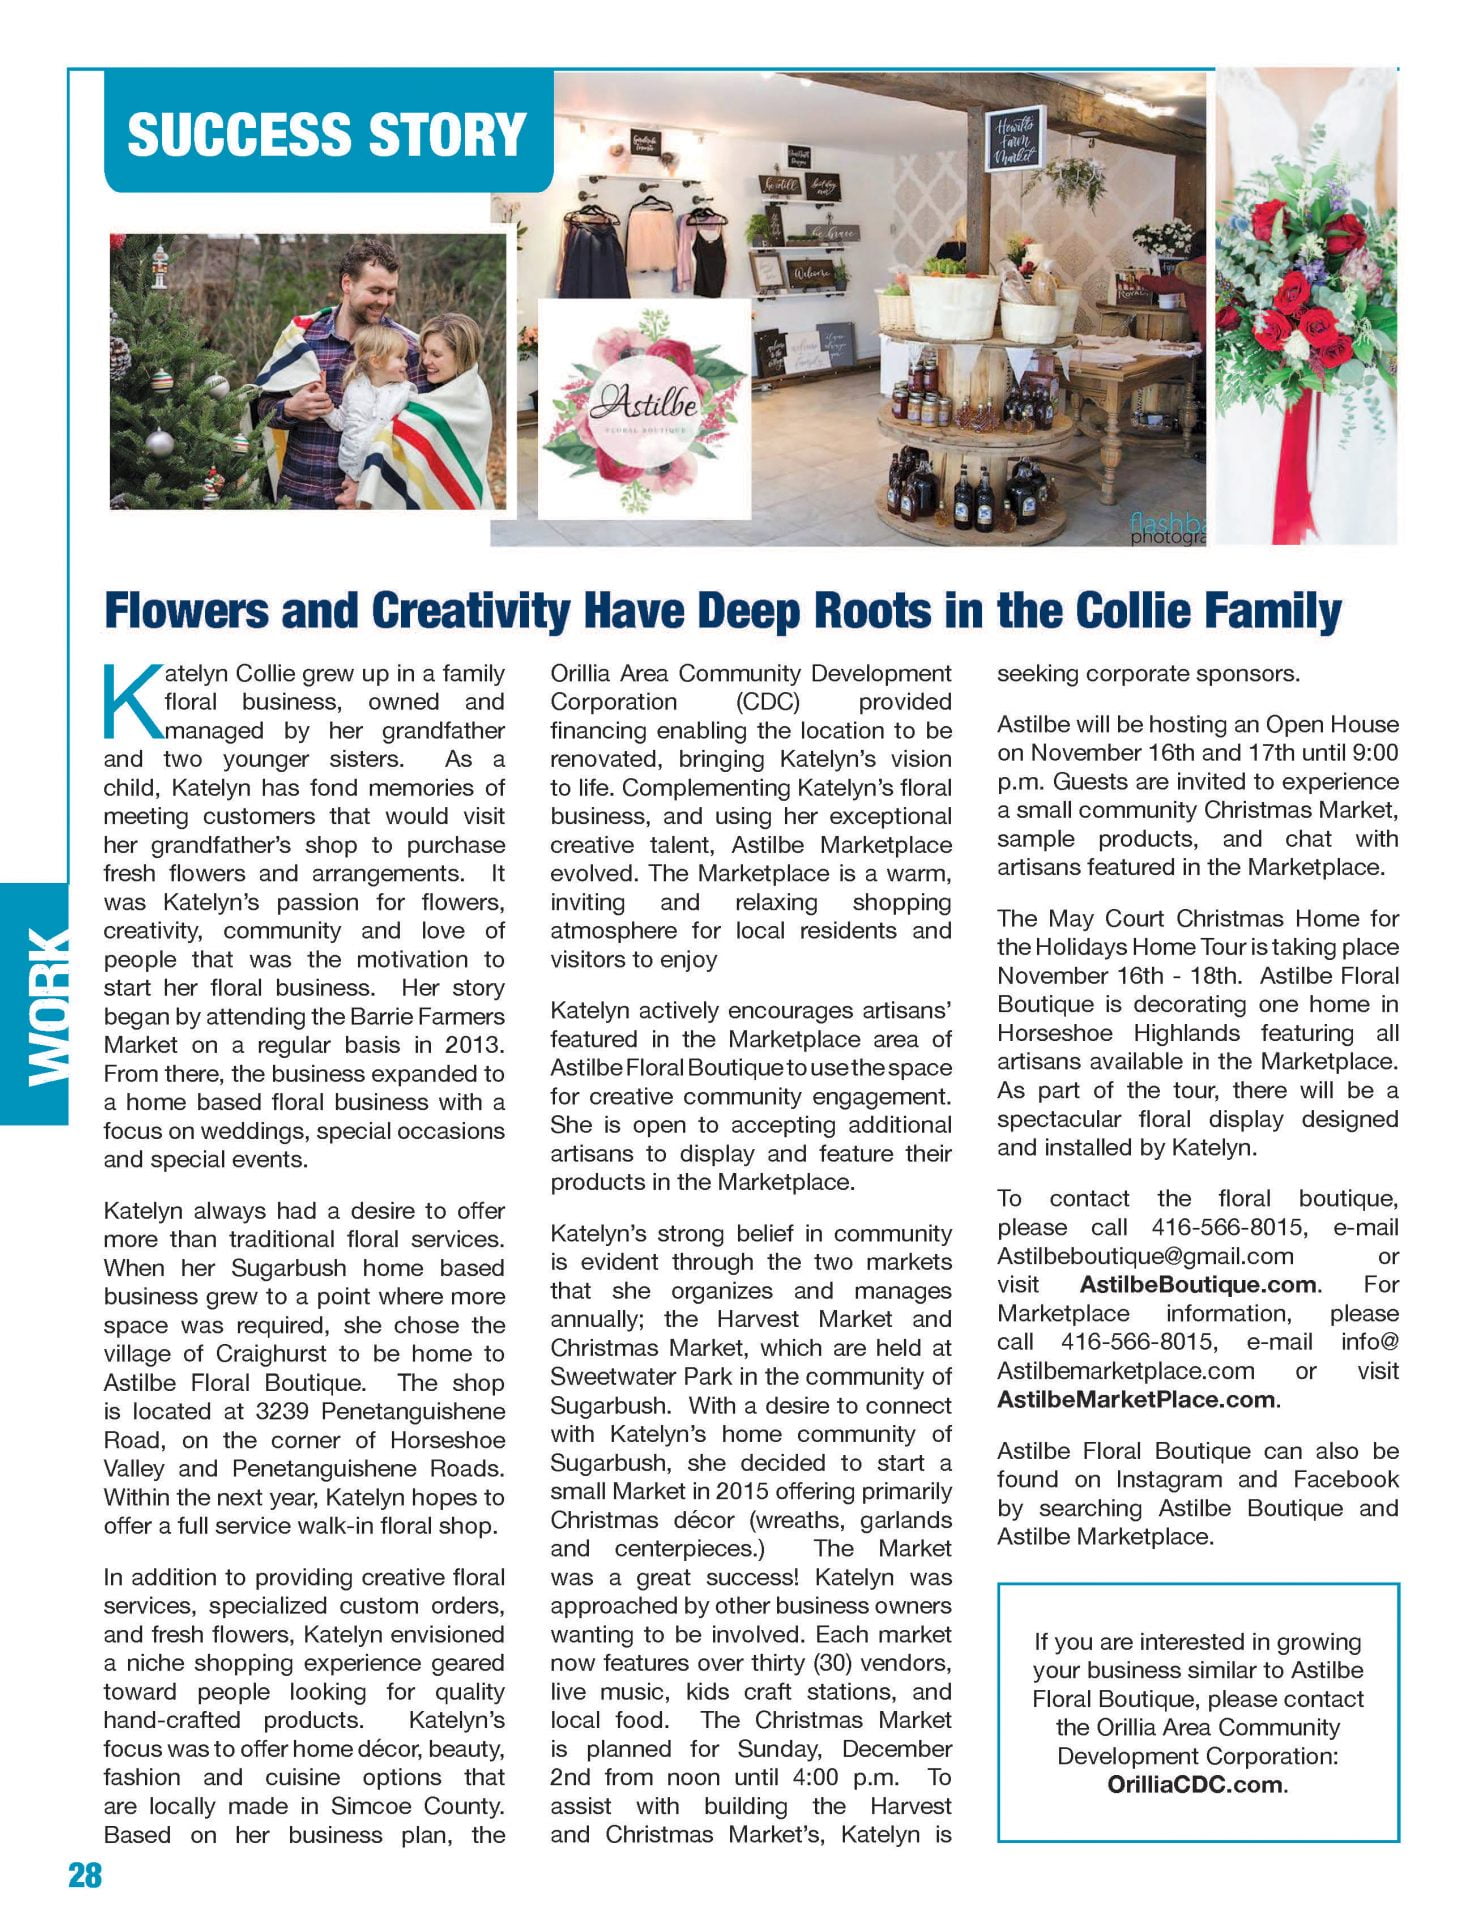 Astible Success Story Oro Medonte - Flowers and Creativity Have Deep Roots in the Collie Family